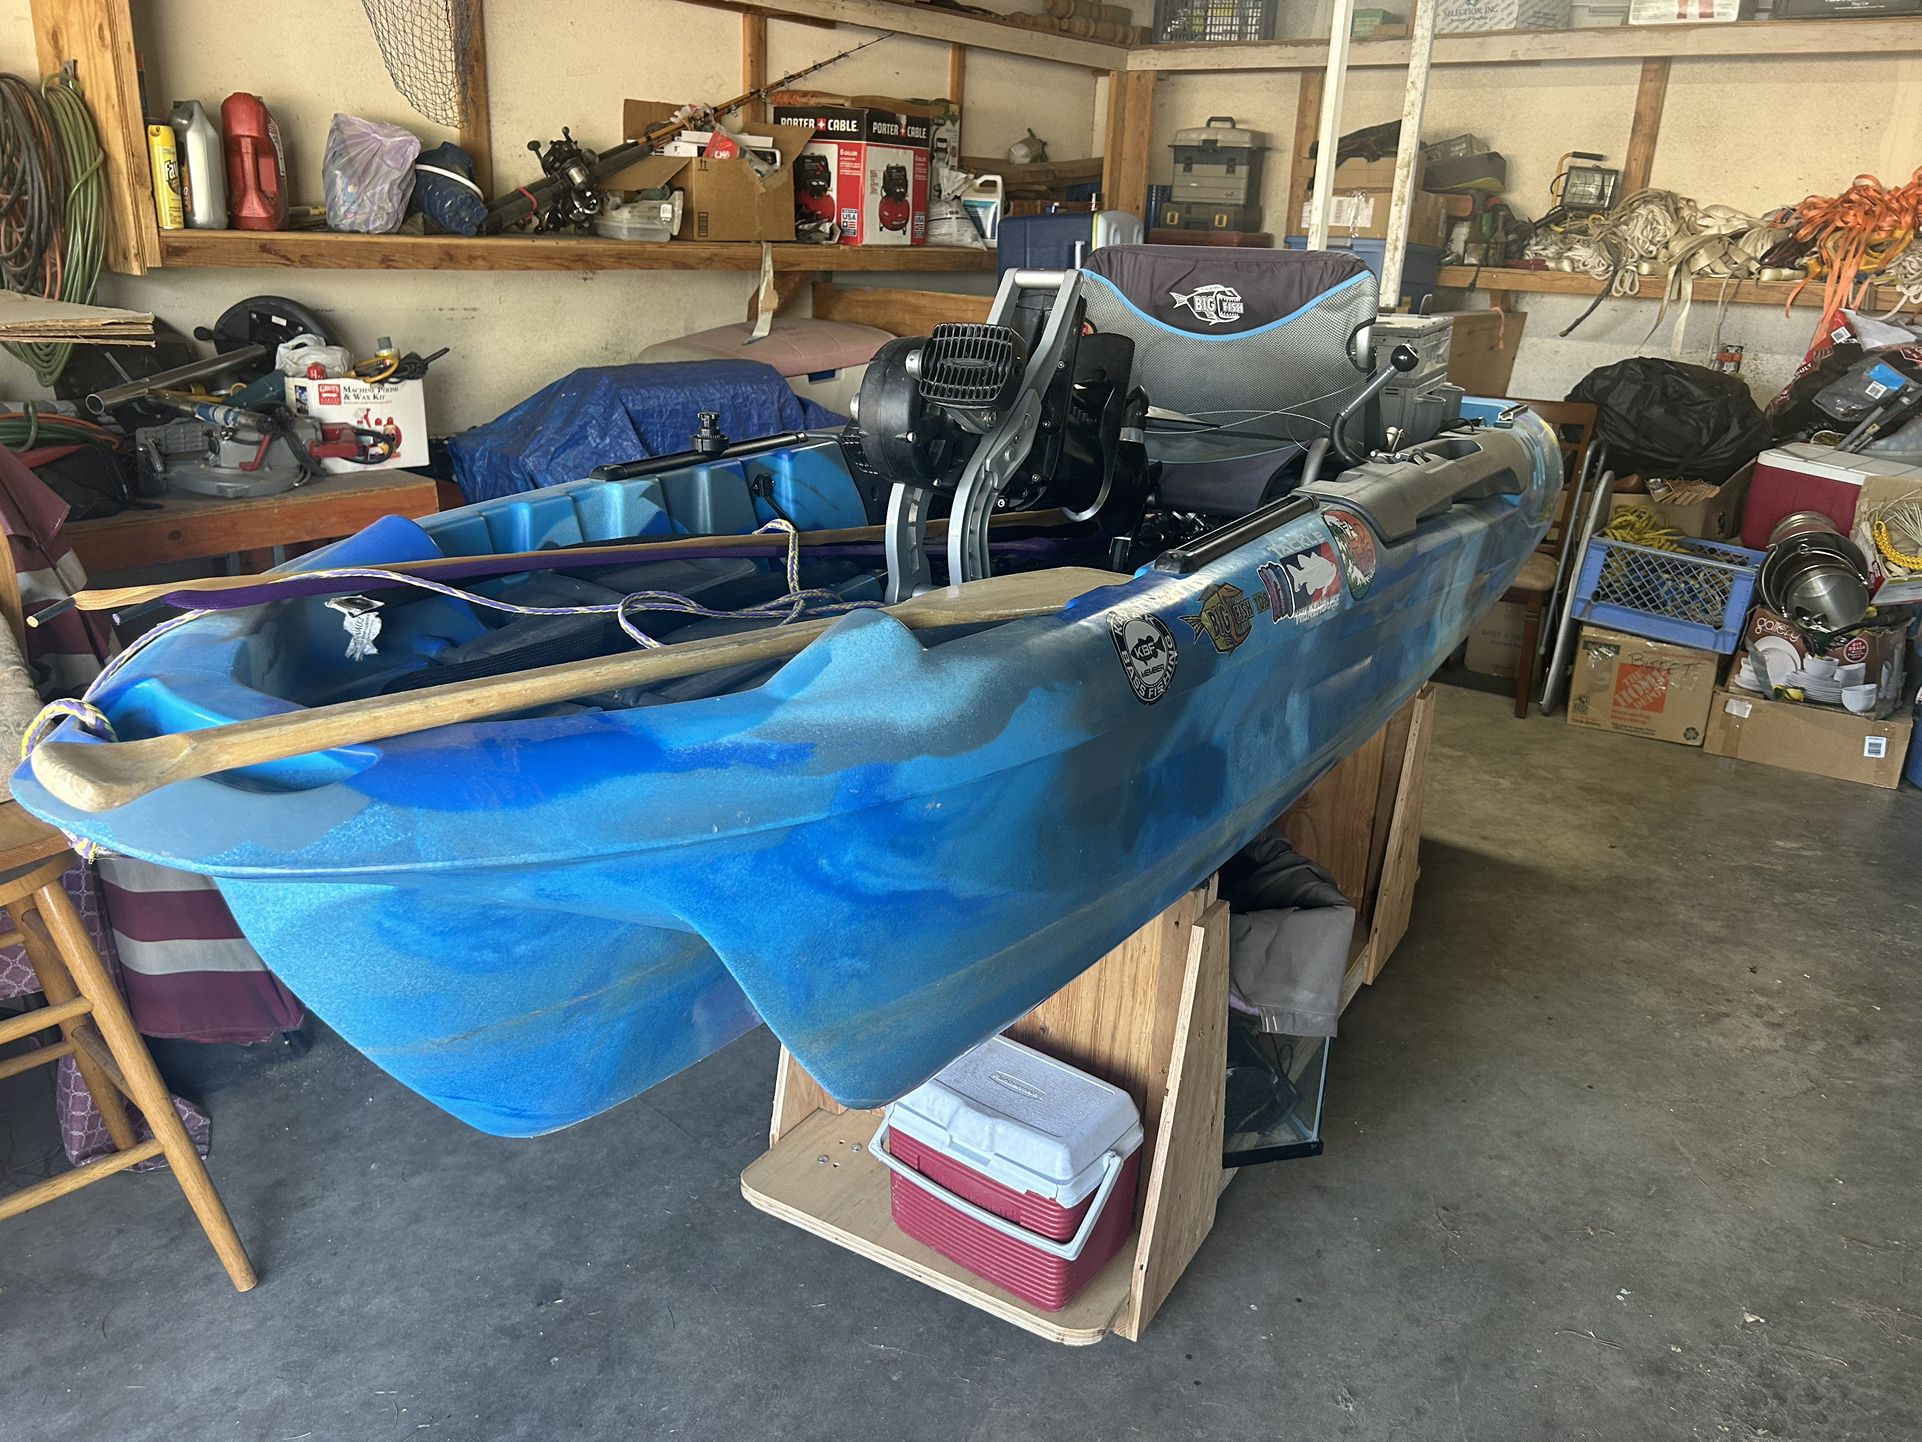 Big Fish 108 Fishing Kayak for Sale in Palmdale, CA - OfferUp